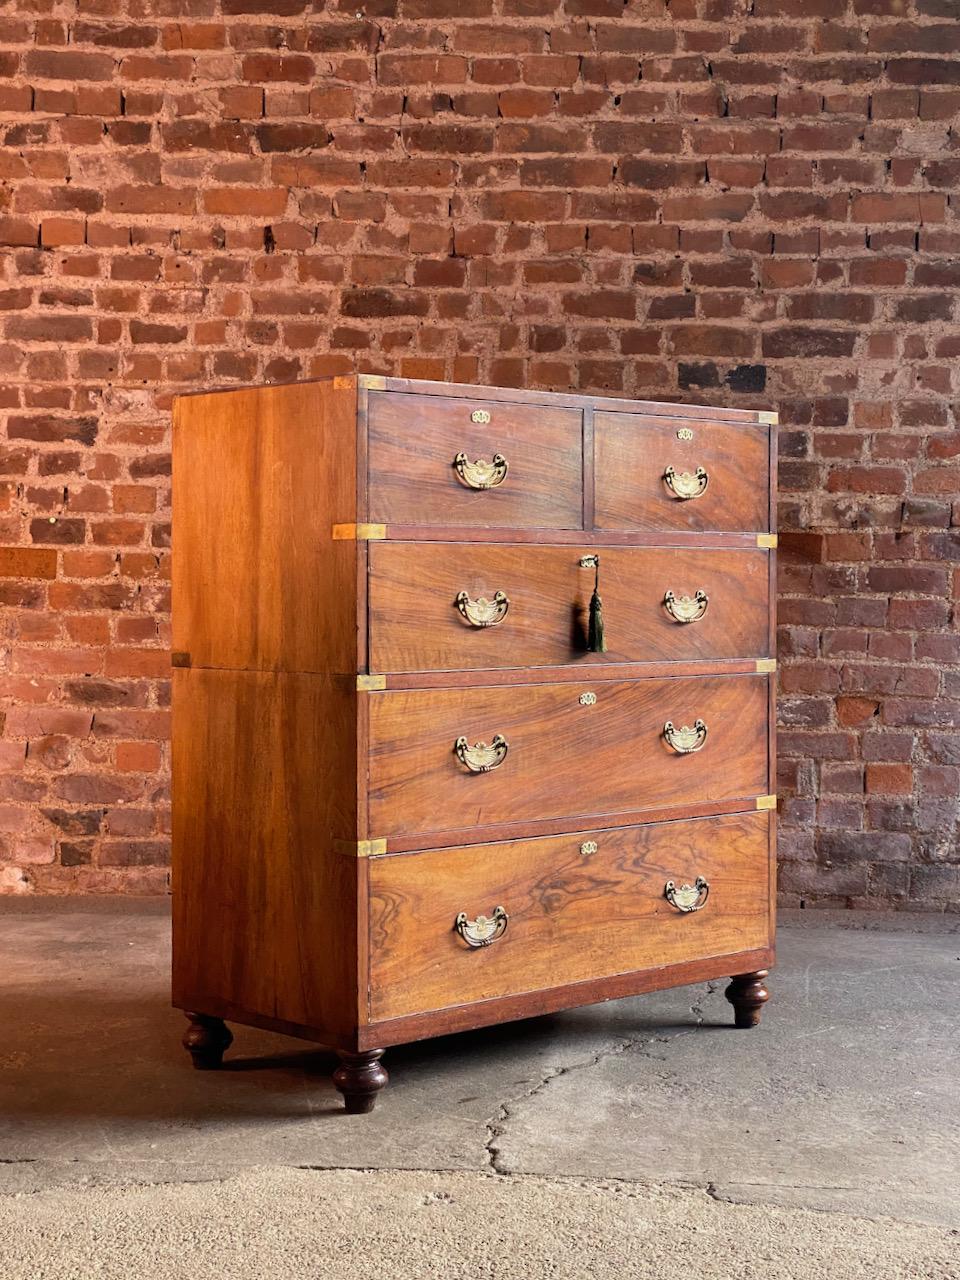 Antique Military Campaign chest by Ross & Co of Dublin circa 1870 number 78

Exceptional Victorian Military Campaign chest of drawers made of camphorwood, dating to late 19th century Ireland circa 1870, the chest in two halves with flush brass